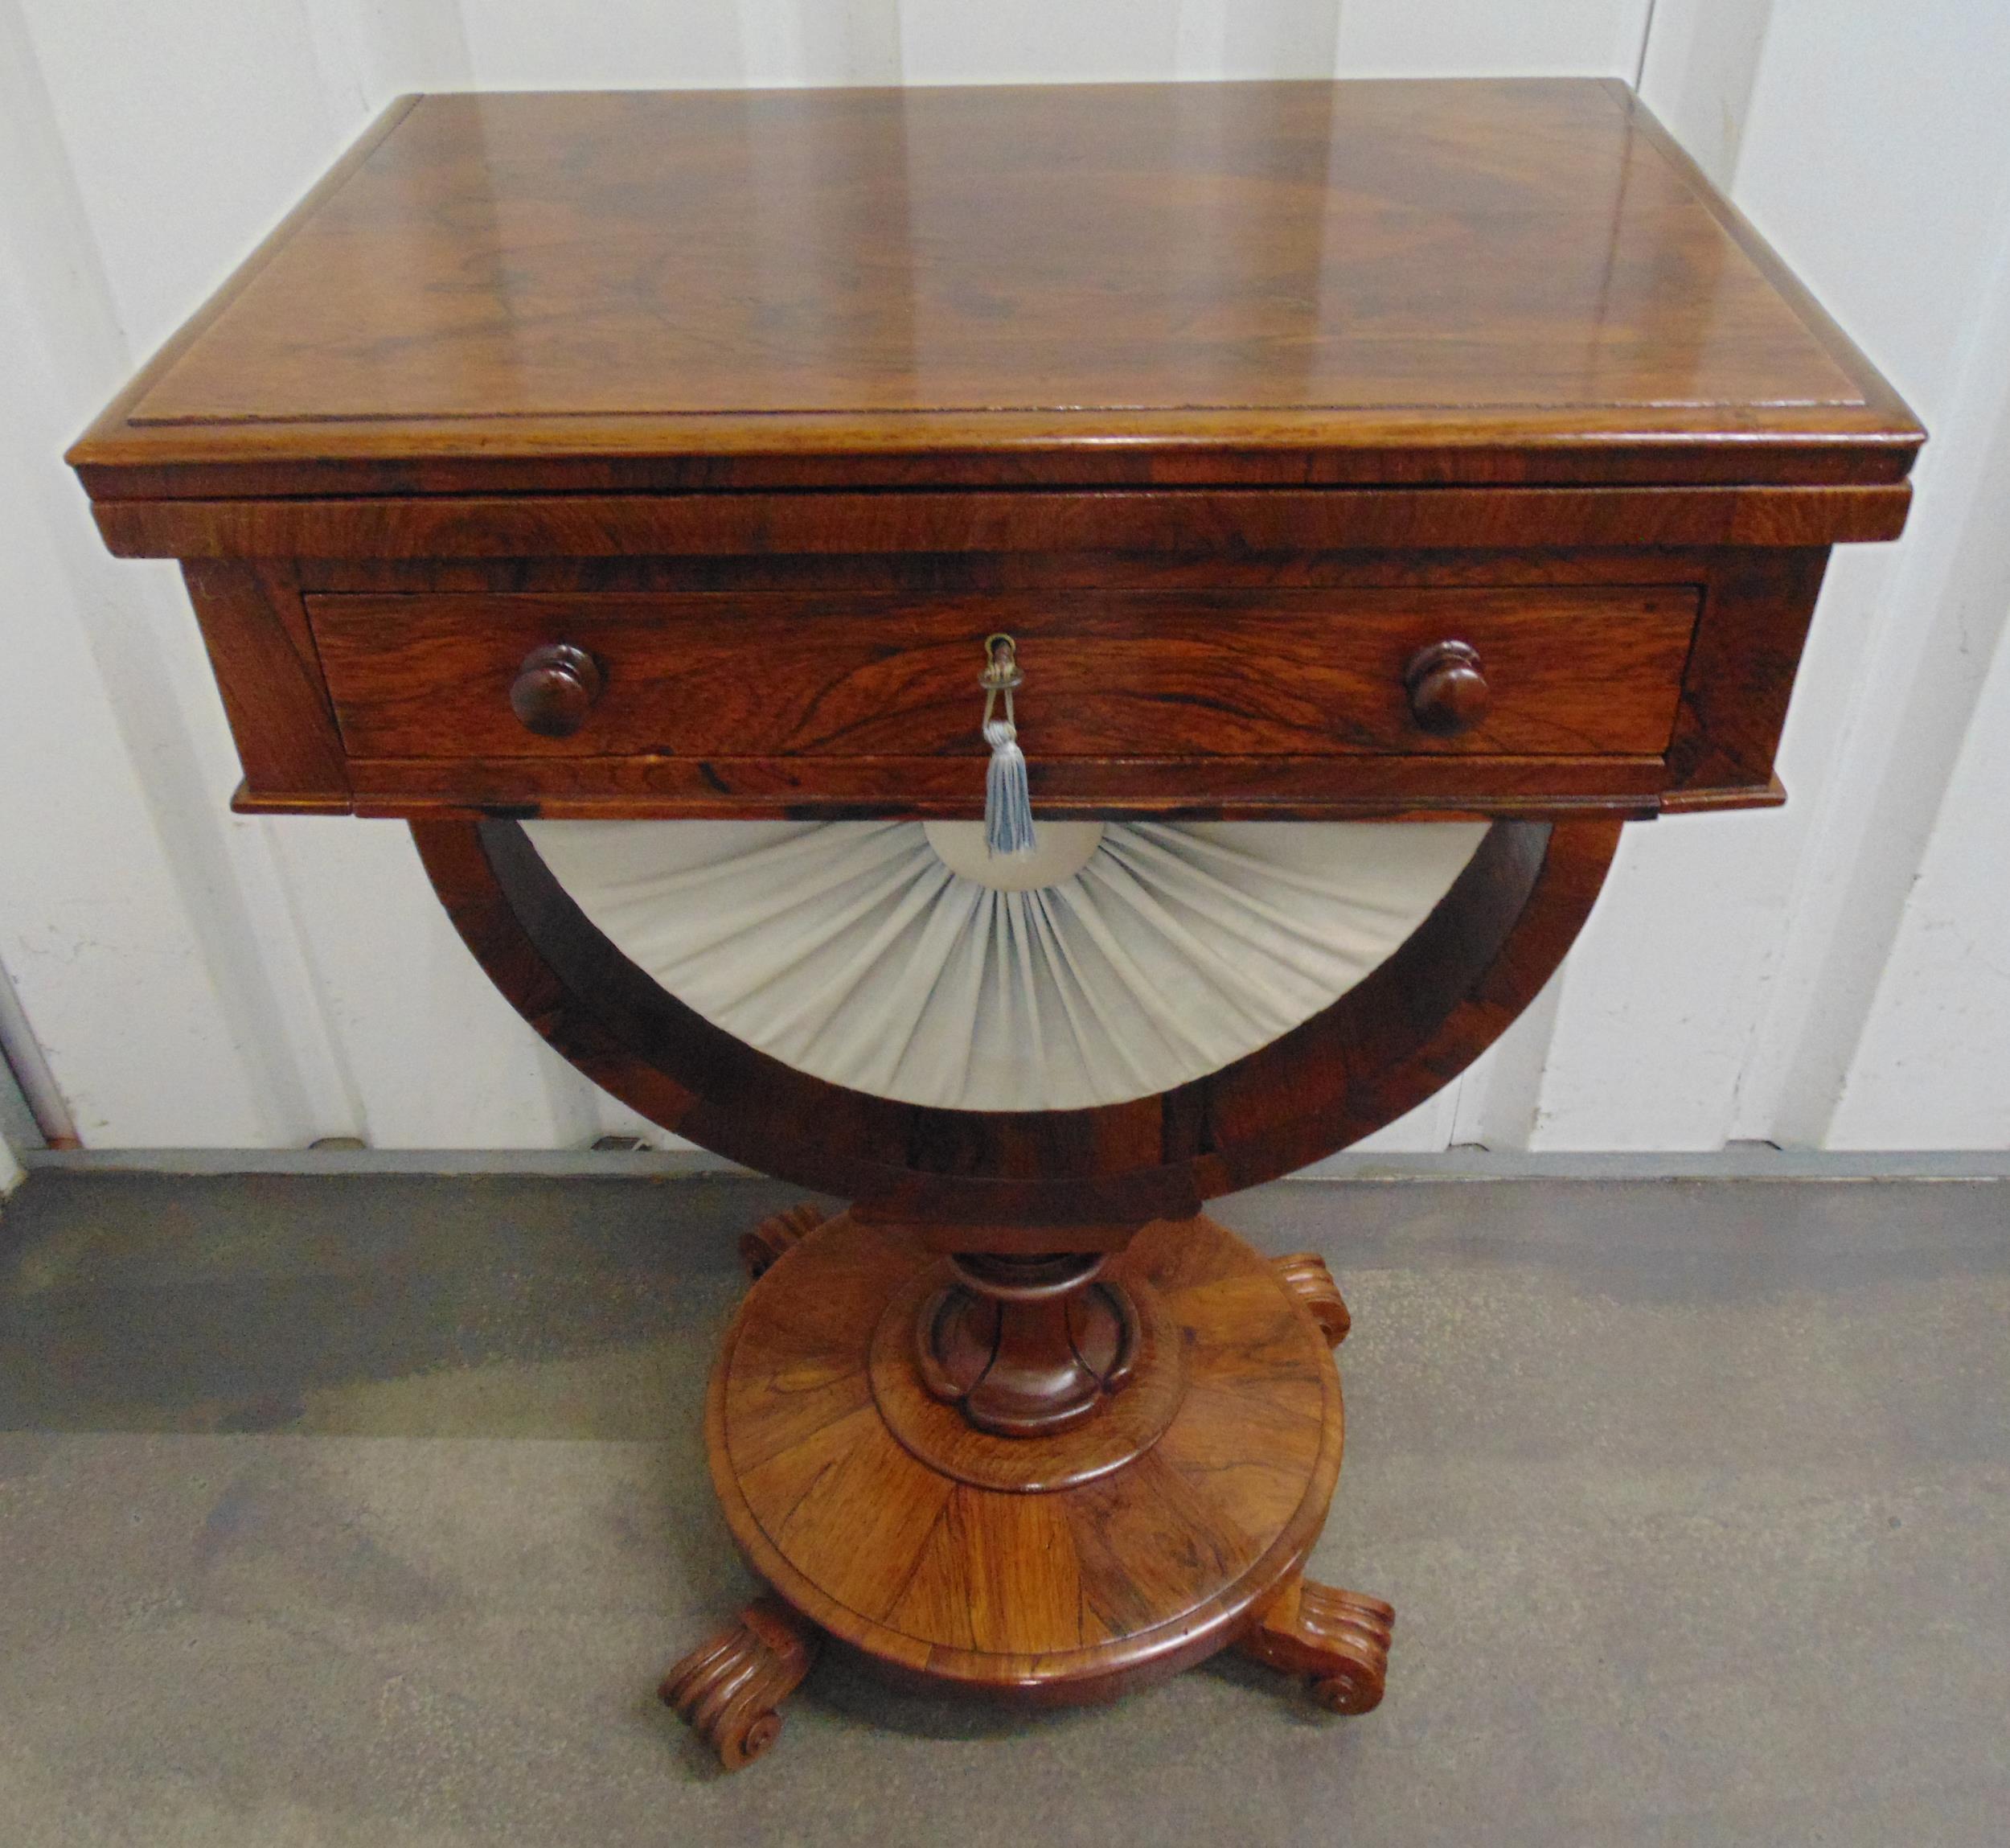 A Victorian mahogany sewing table cum games table on raised circular base with scroll feet, 75 x